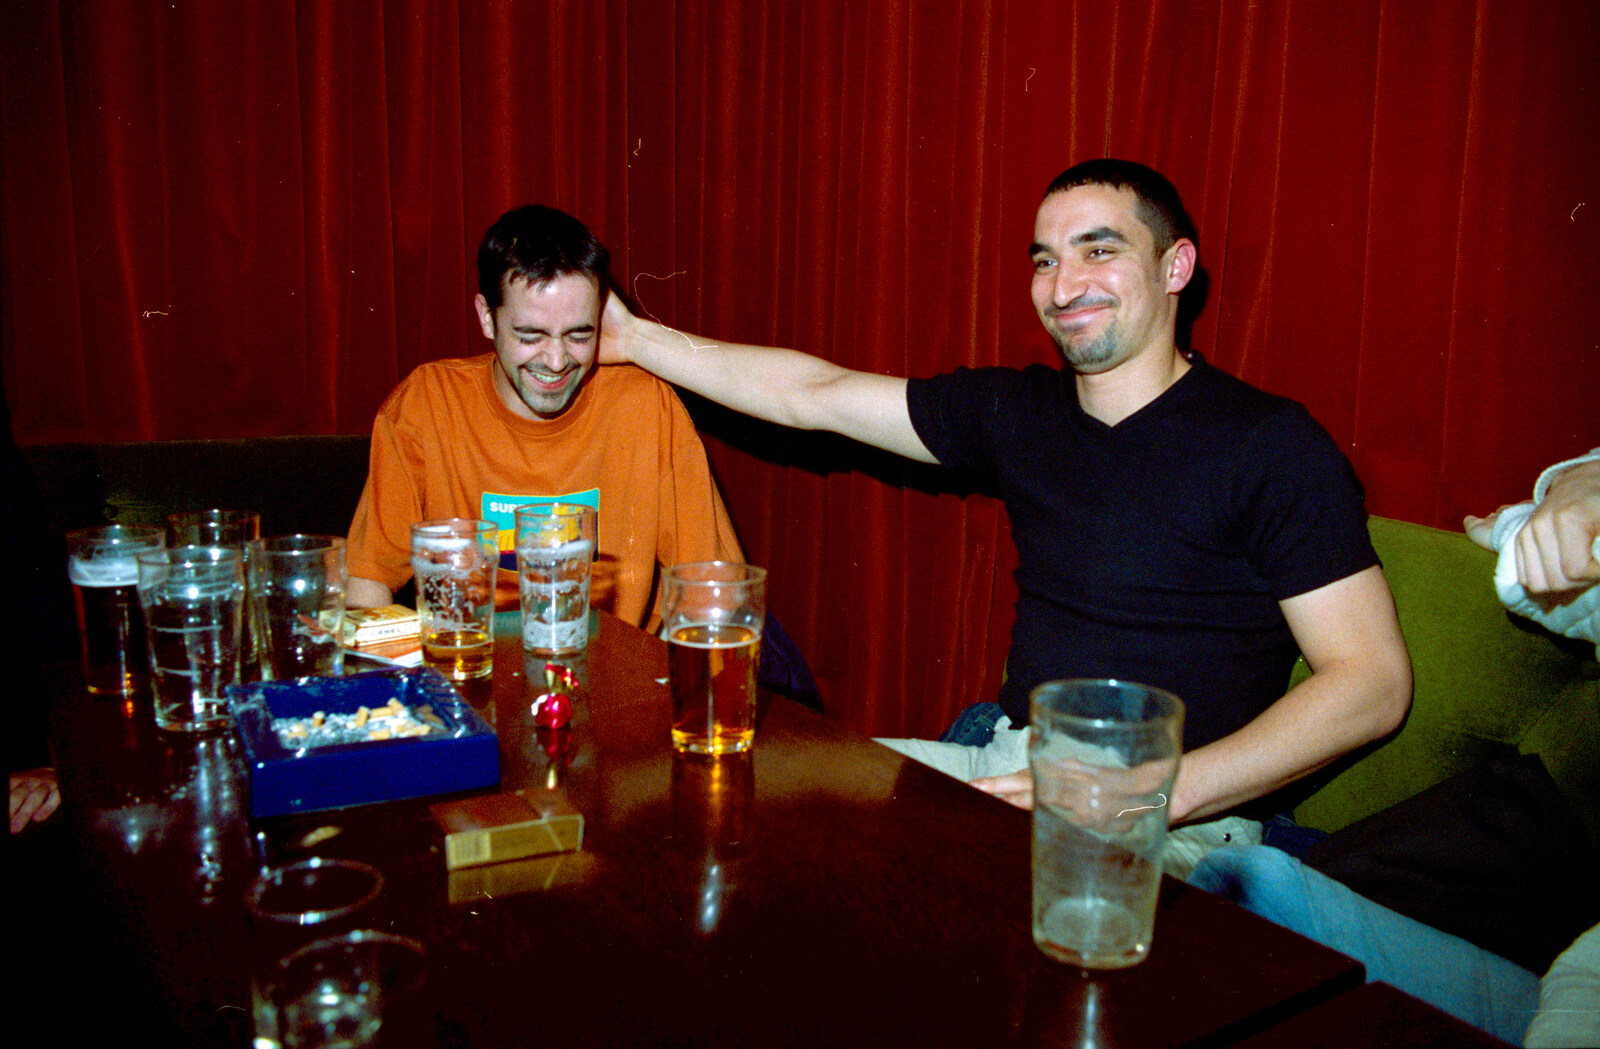 Trevor gets a pat on the head from CISU Plays Cardinal's Hat in the SCC Social Club, Ipswich, Suffolk - 3rd August 1997